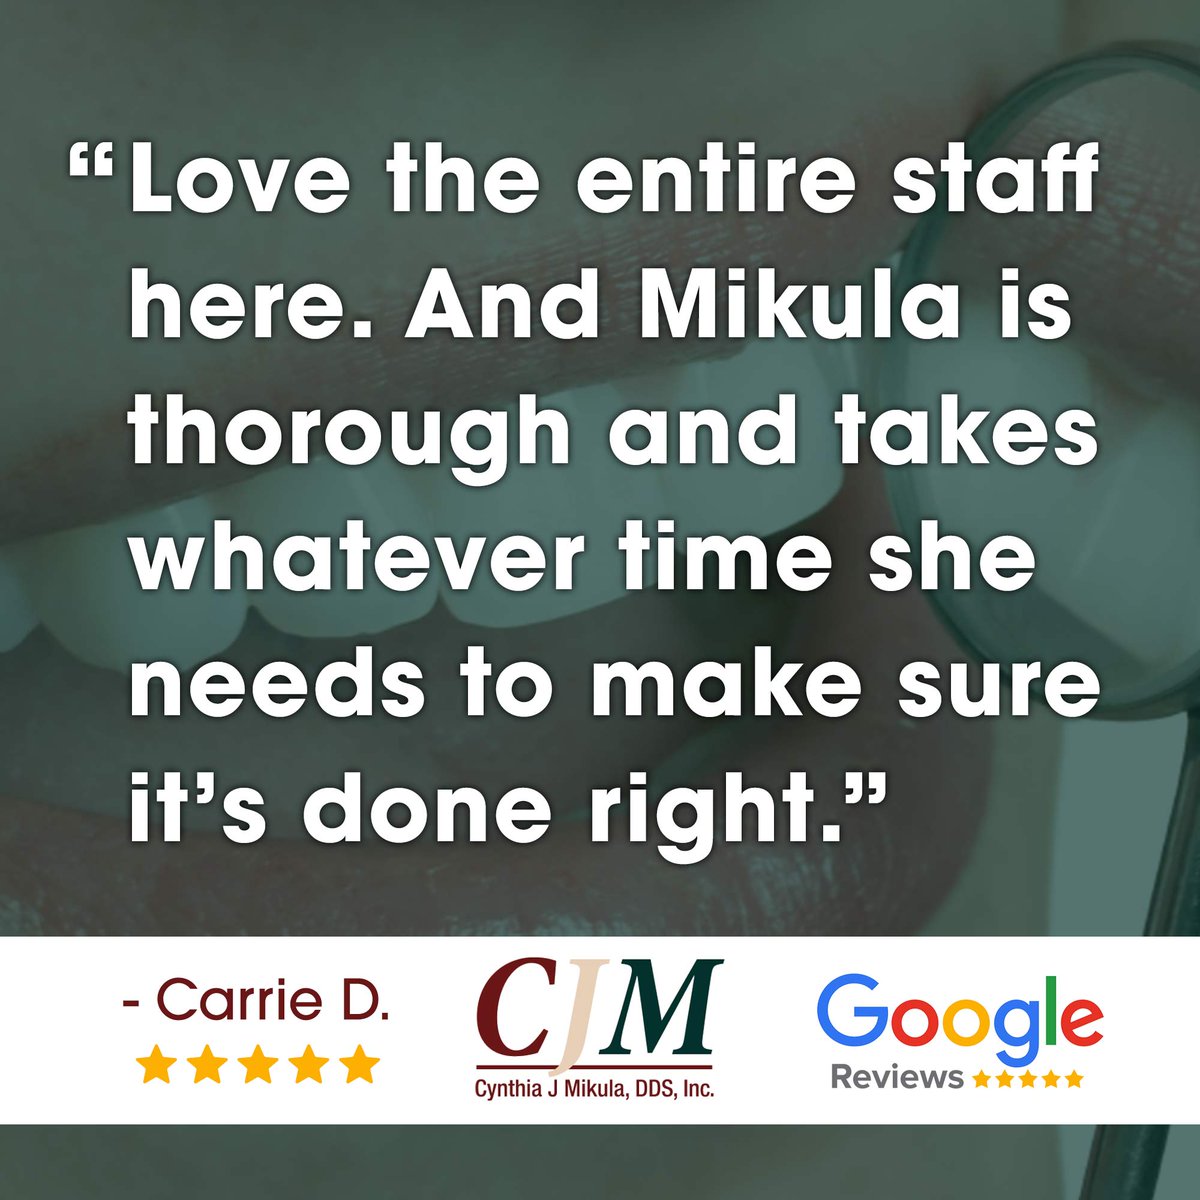 We love ⭐⭐⭐⭐⭐ reviews! Nothing speaks better to the quality of our dental services than patient testimonials. 🦷😁 Here's to healthy smiles and more satisfied patients! 🎉

#MikulaDDS #GoogleReview #FiveStars #PatientSatisfaction #DentalCare #Gratitude